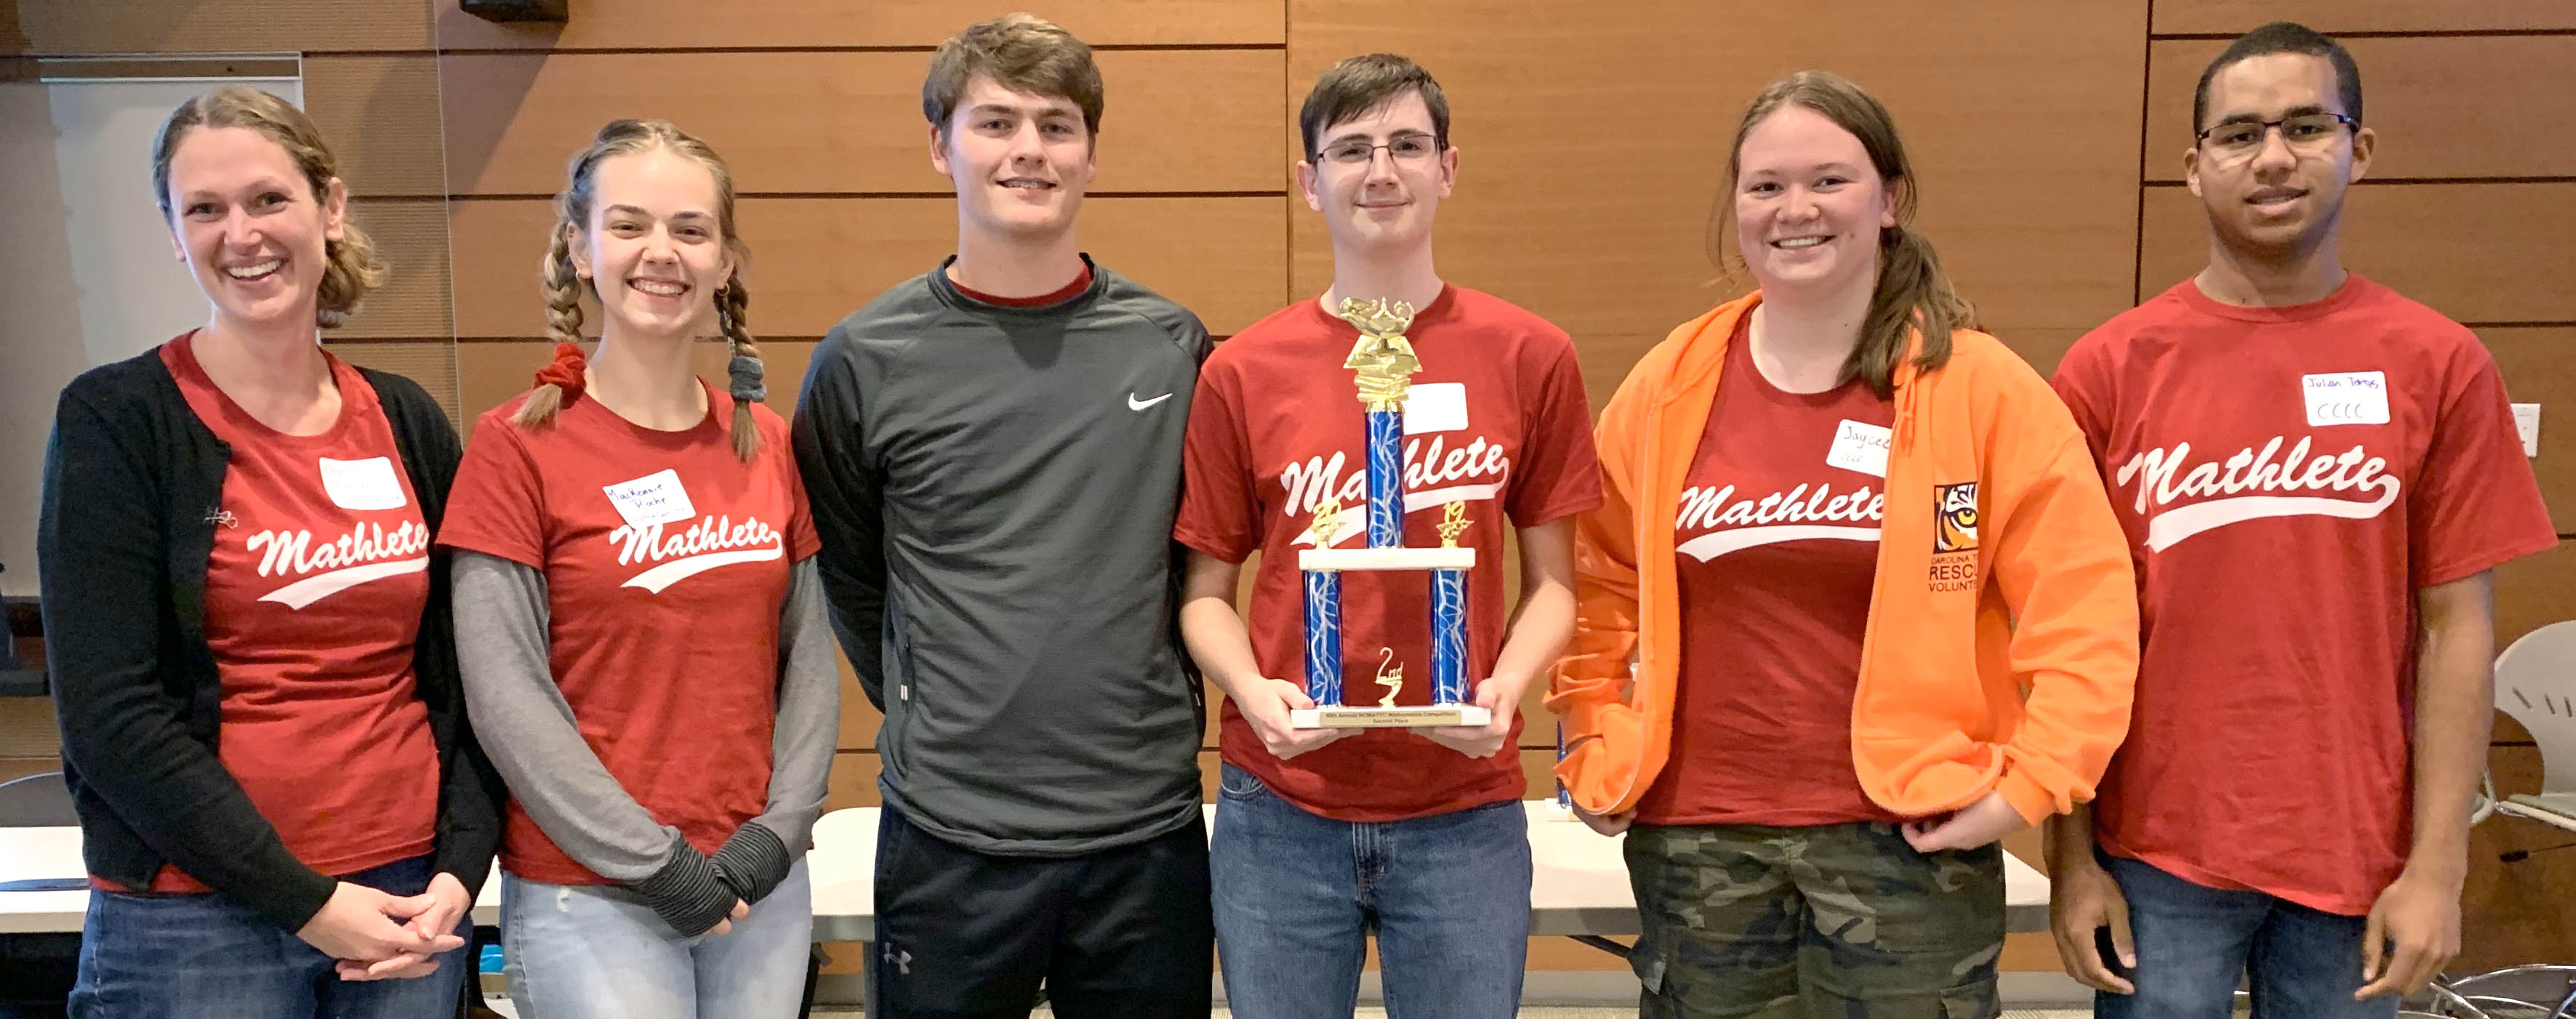 Click to enlarge,  The Central Carolina Community College Math Club recently competed -- and finished second -- in the North Carolina Mathematical Association of Two Year Colleges (NCMATYC) mathematics competition event held at Wake Tech Community College in Raleigh. Pictured the CCCC Math Club team, left to right: Charity Turner (Math Club Faculty Advisor), Mackenzie Roche, Drew Bryan, Sean Blackburn, Jaycee Sansom, and Julian Banguera Torres. Mackenzie Roche placed third of all competing students in the morning calculus competition. 